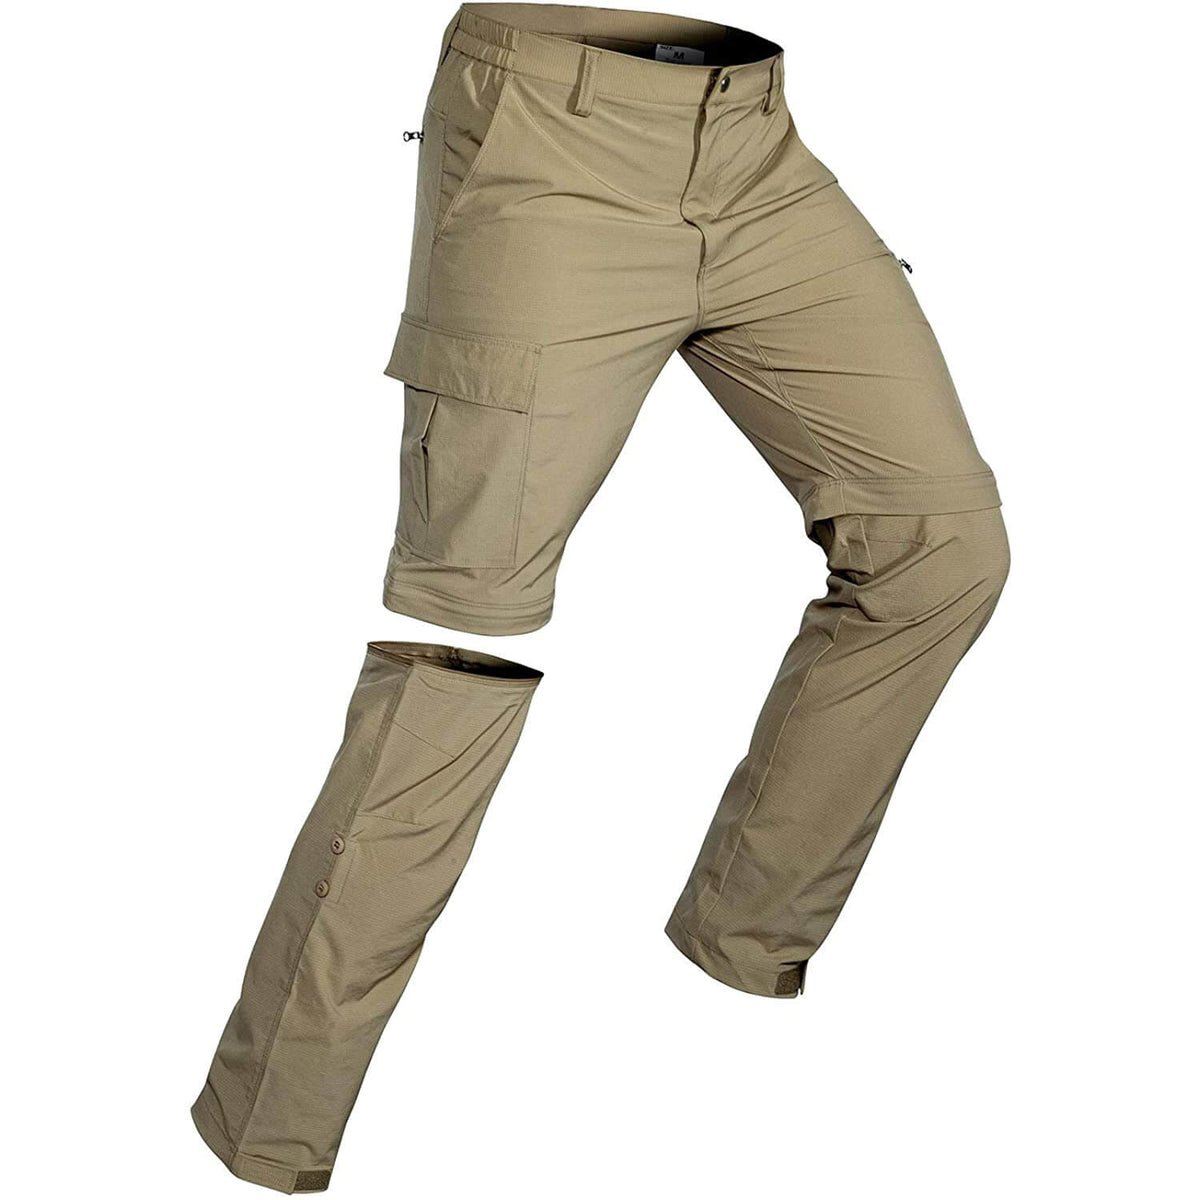 Men's Breathable Cargo Convertible Hiking Pants